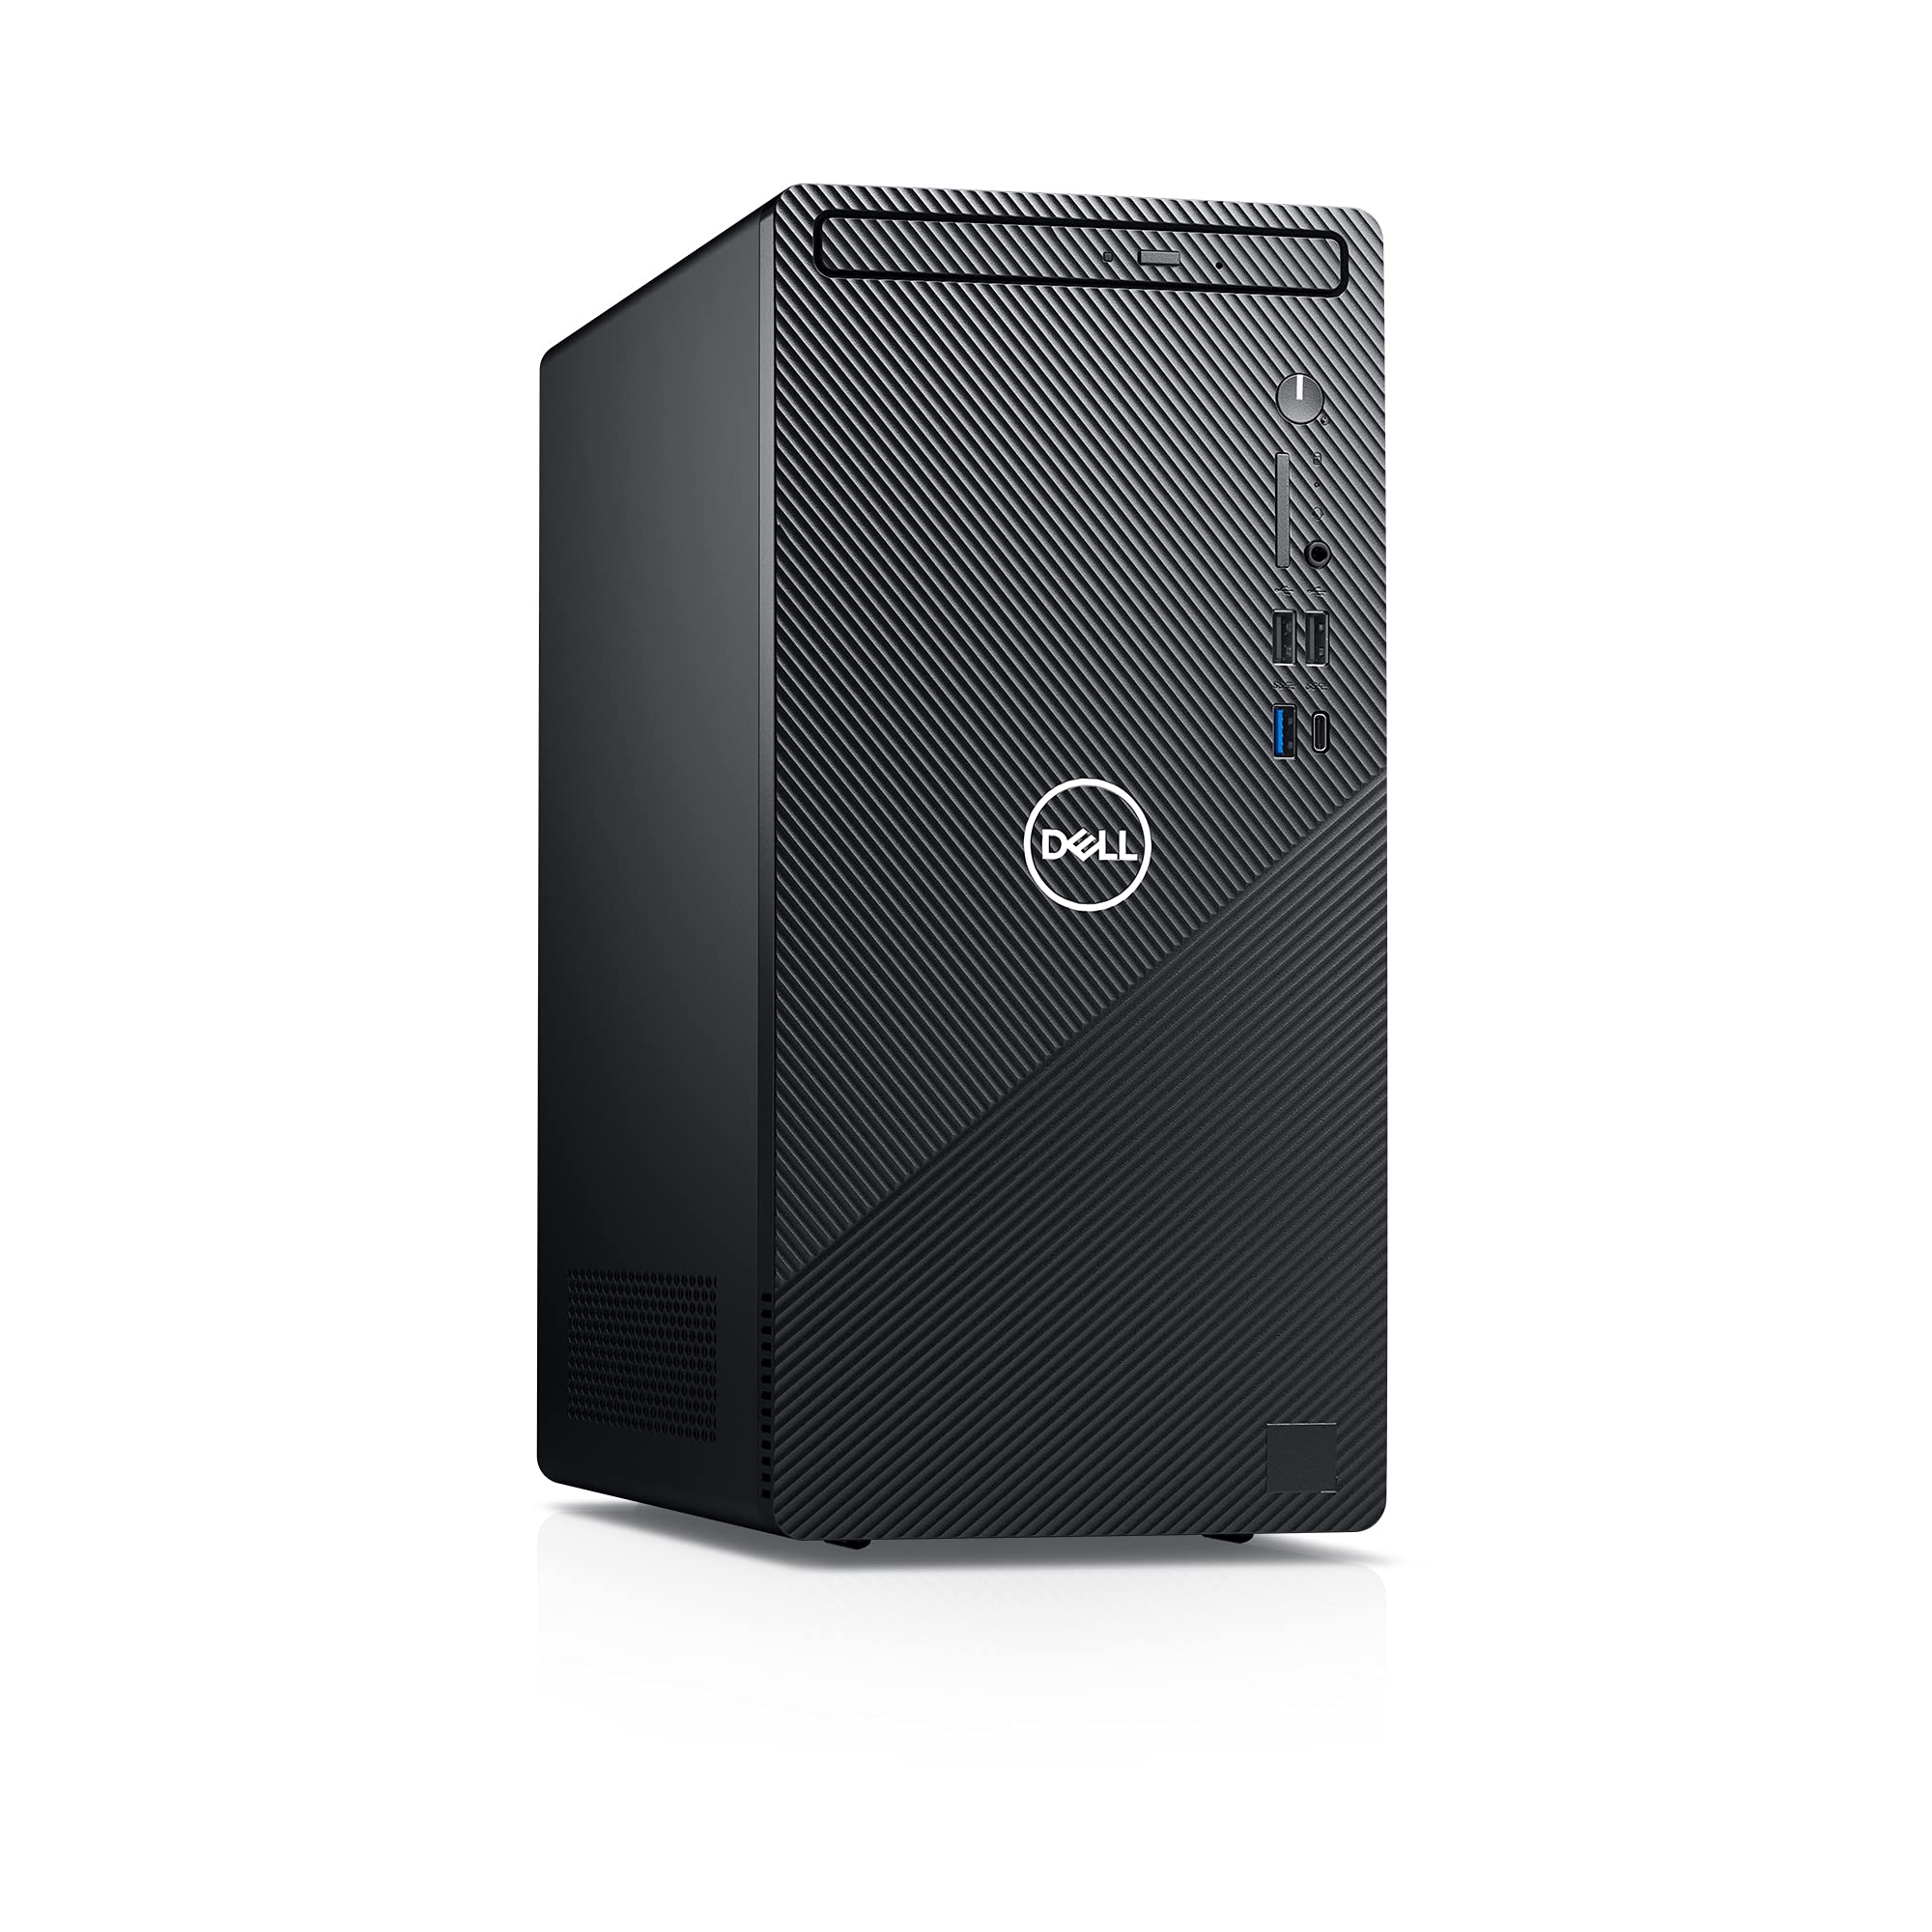 Dell Inspiron 3891 Compact Desktop Computer Tower - Intel Core i3-10105, 8GB DDR4 RAM, 256GB SSD, Intel UHD Graphics 630 with Shared Graphics Memory, Windows 10 Home - Black (Latest Model)